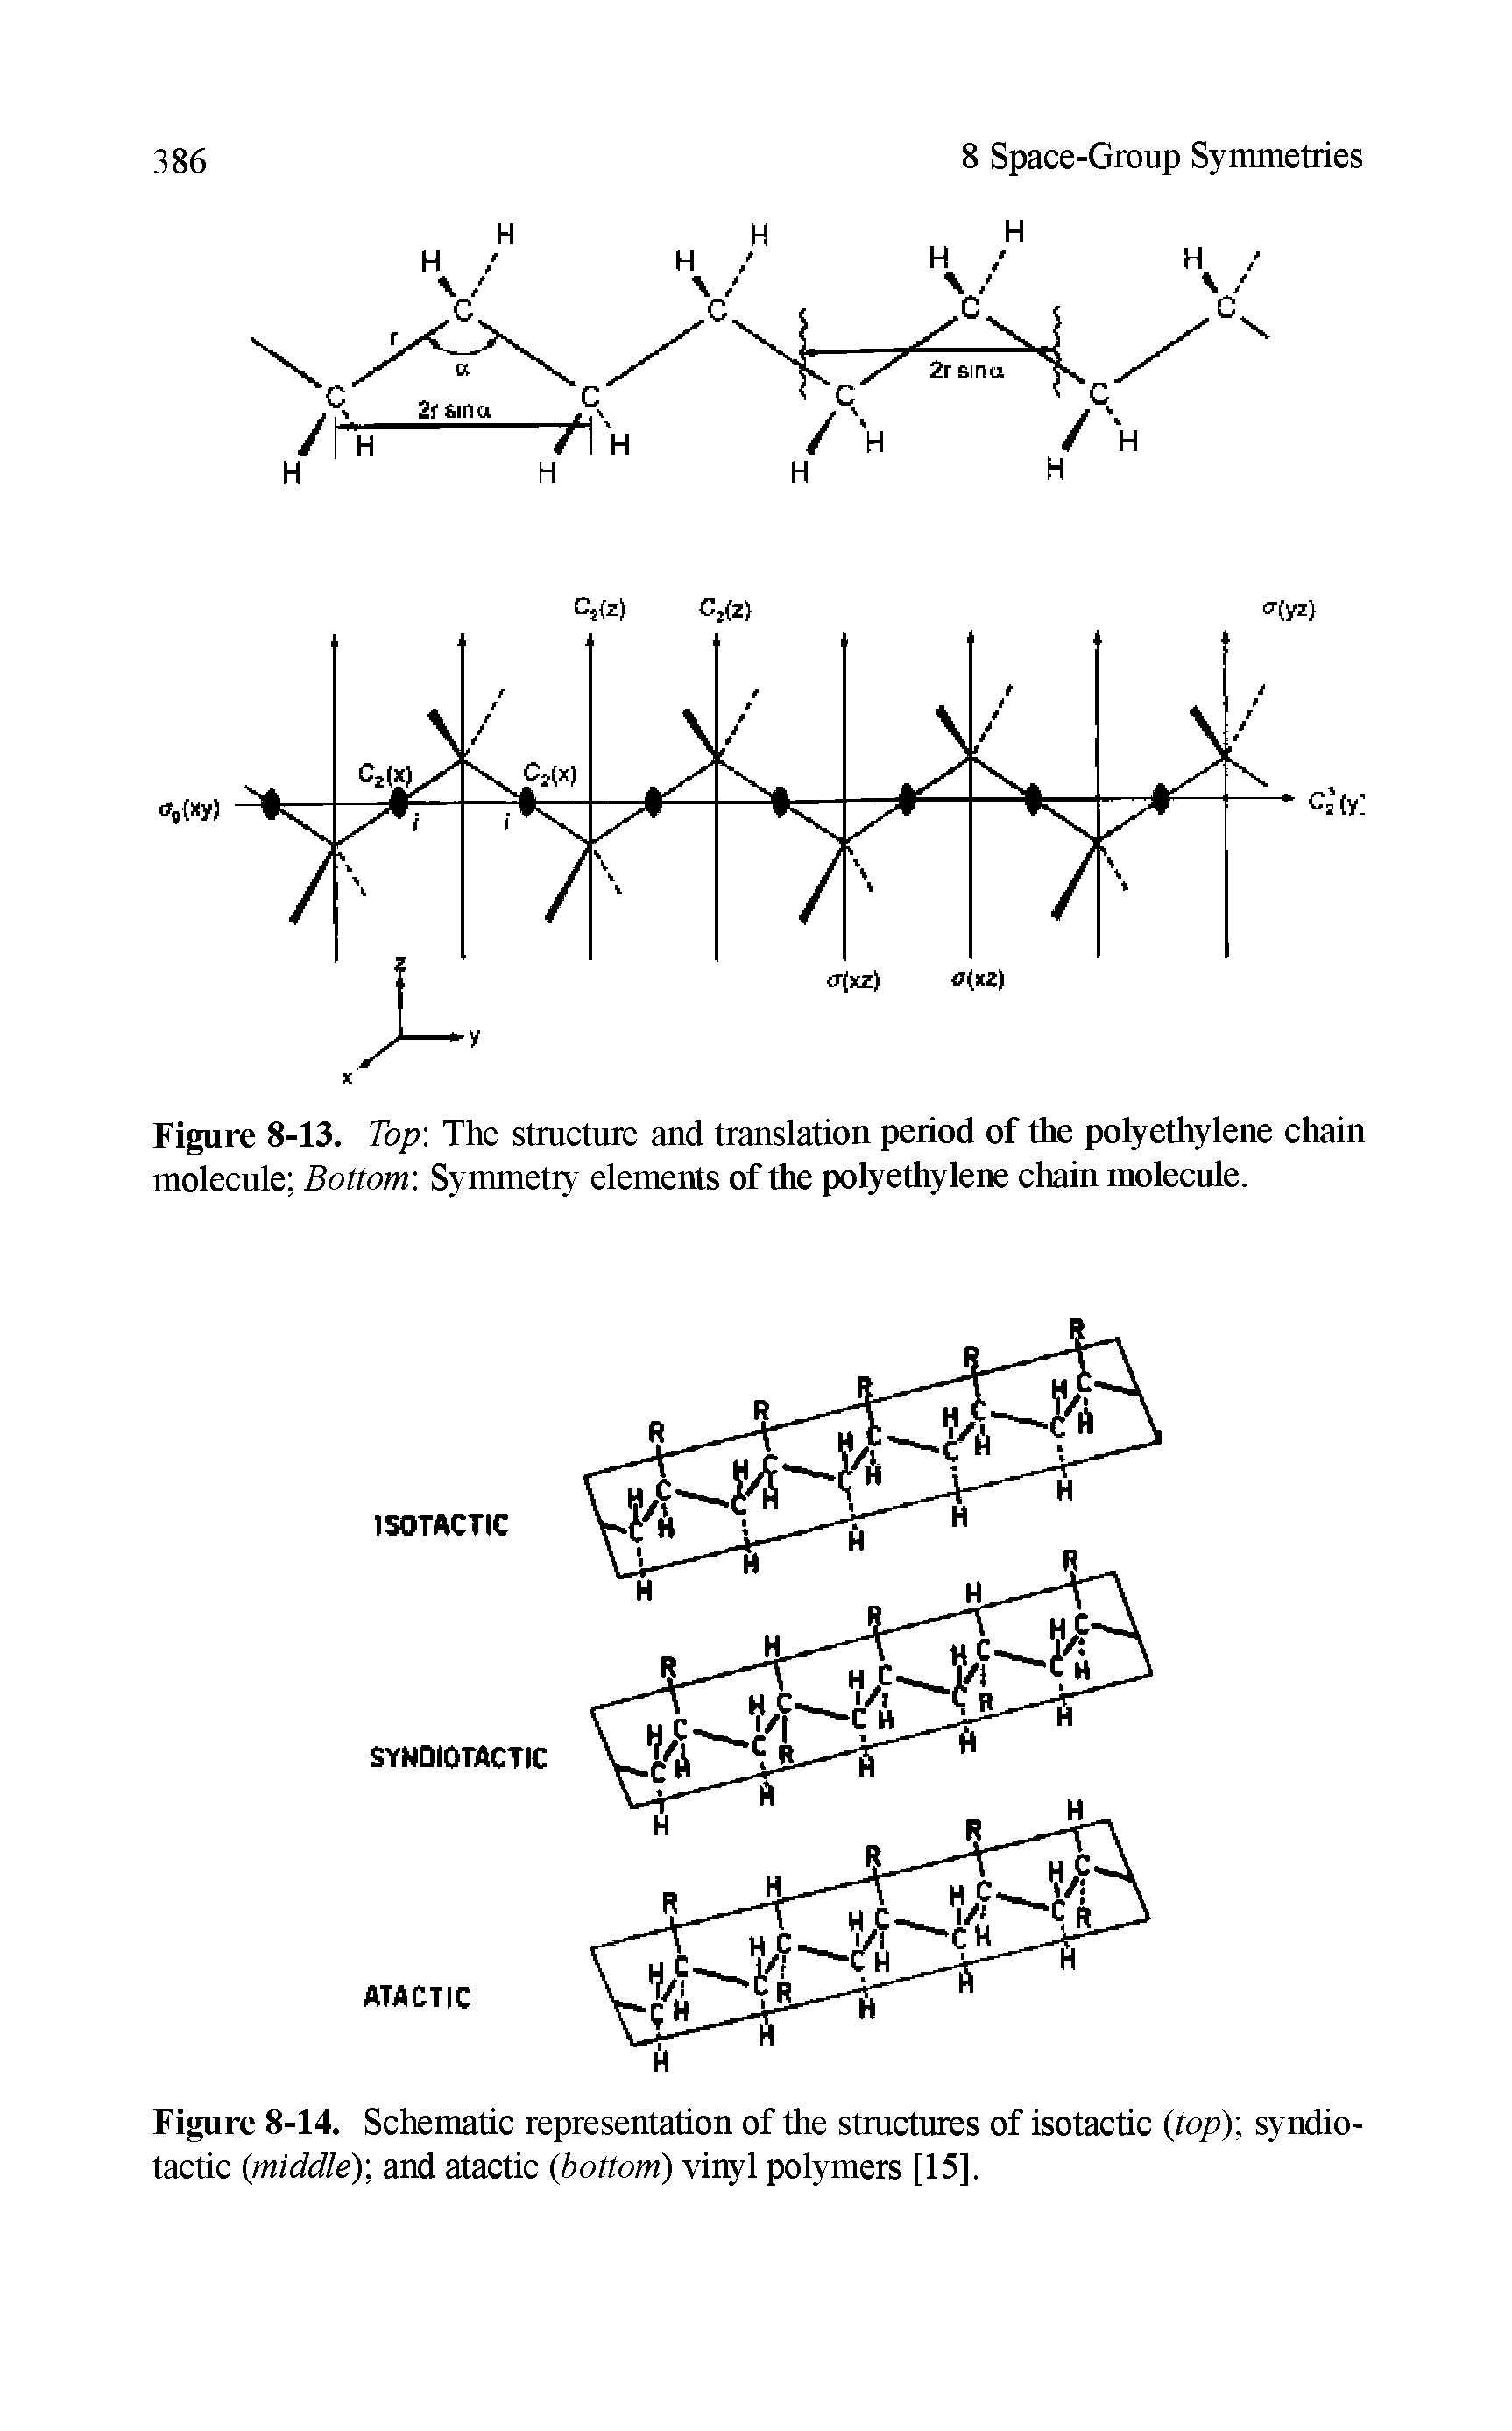 Figure 8-13. Top The structure and translation period of the polyethylene chain molecule Bottom Symmetry elements of the polyethylene chain molecule.